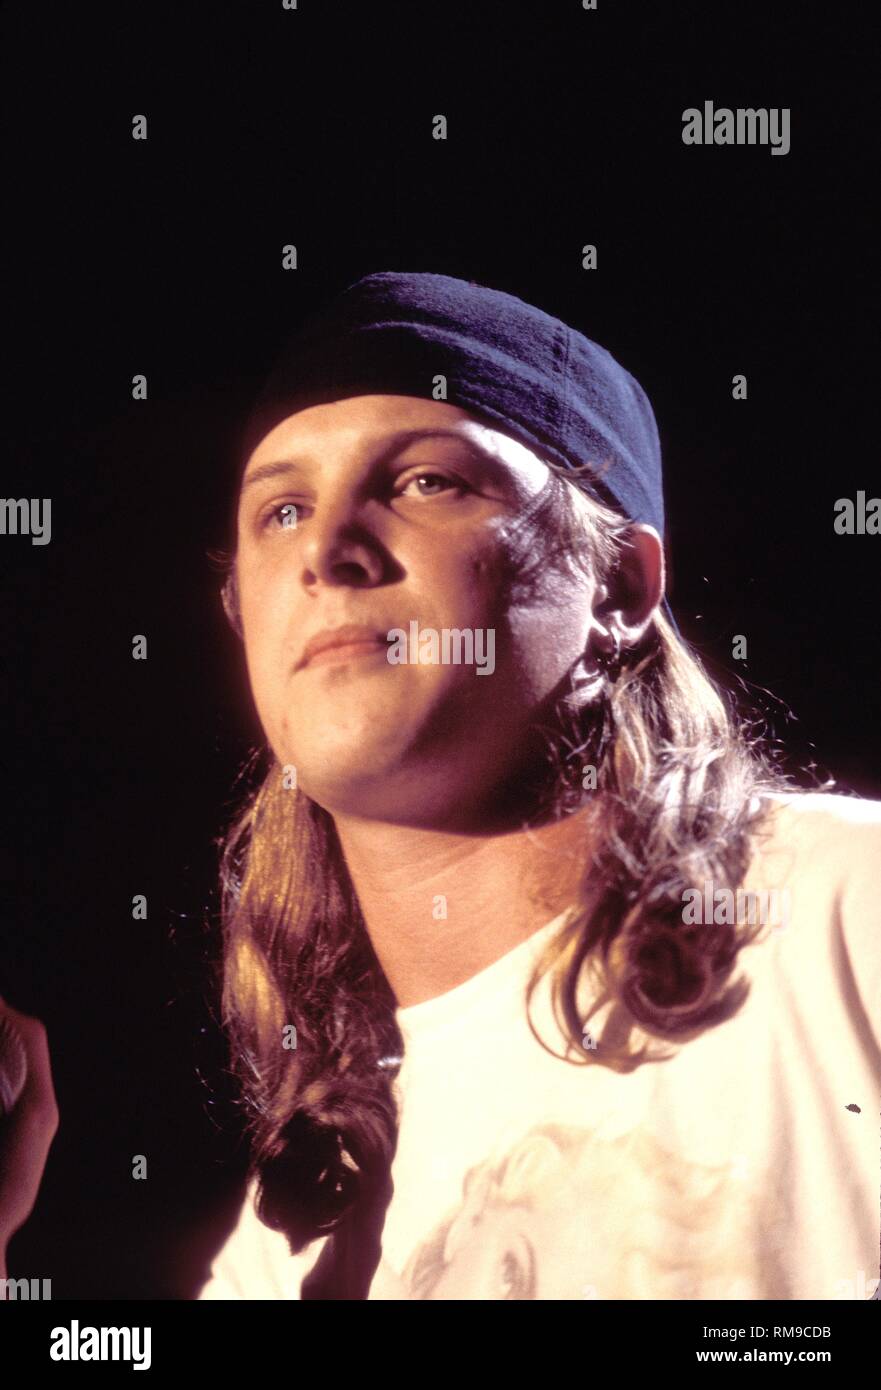 Candlebox vocalist Kevin Martin is shown on stage during a 'live' concert performance. Stock Photo